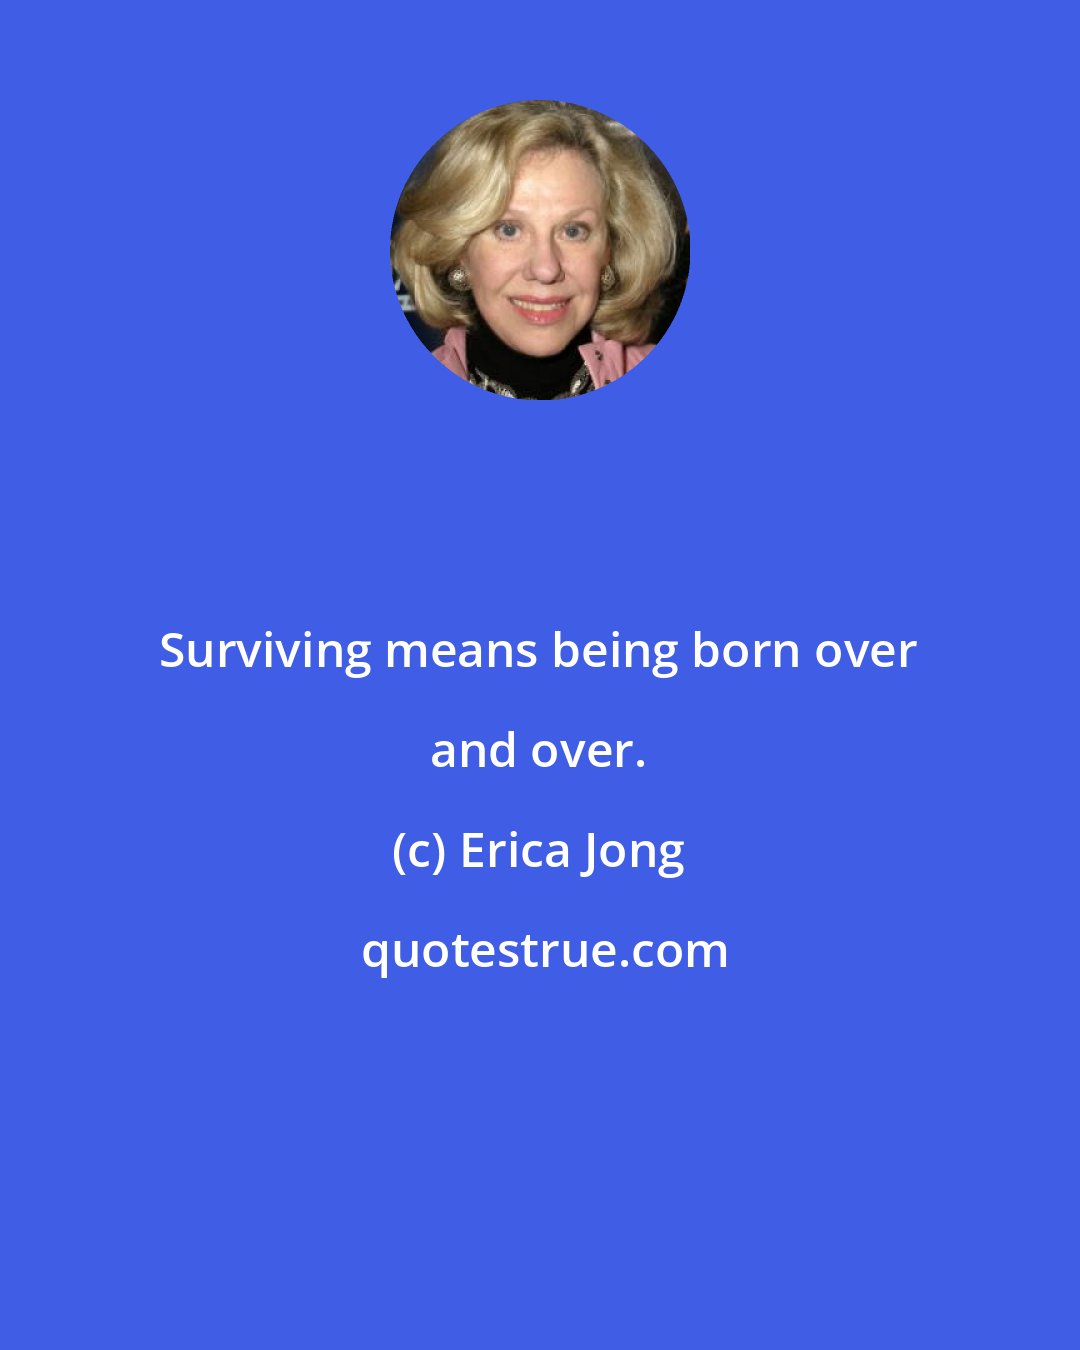 Erica Jong: Surviving means being born over and over.